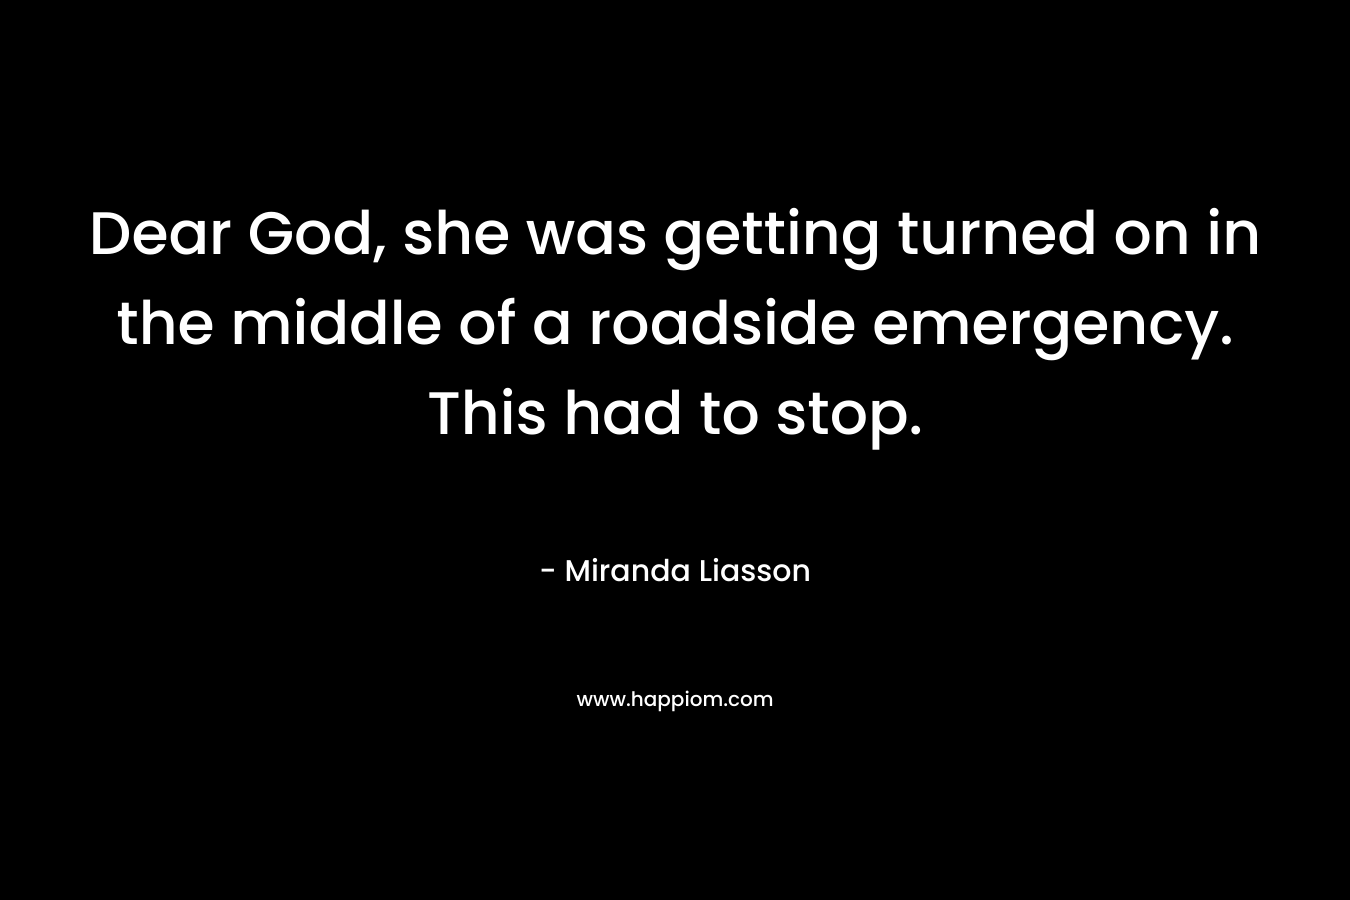 Dear God, she was getting turned on in the middle of a roadside emergency. This had to stop.